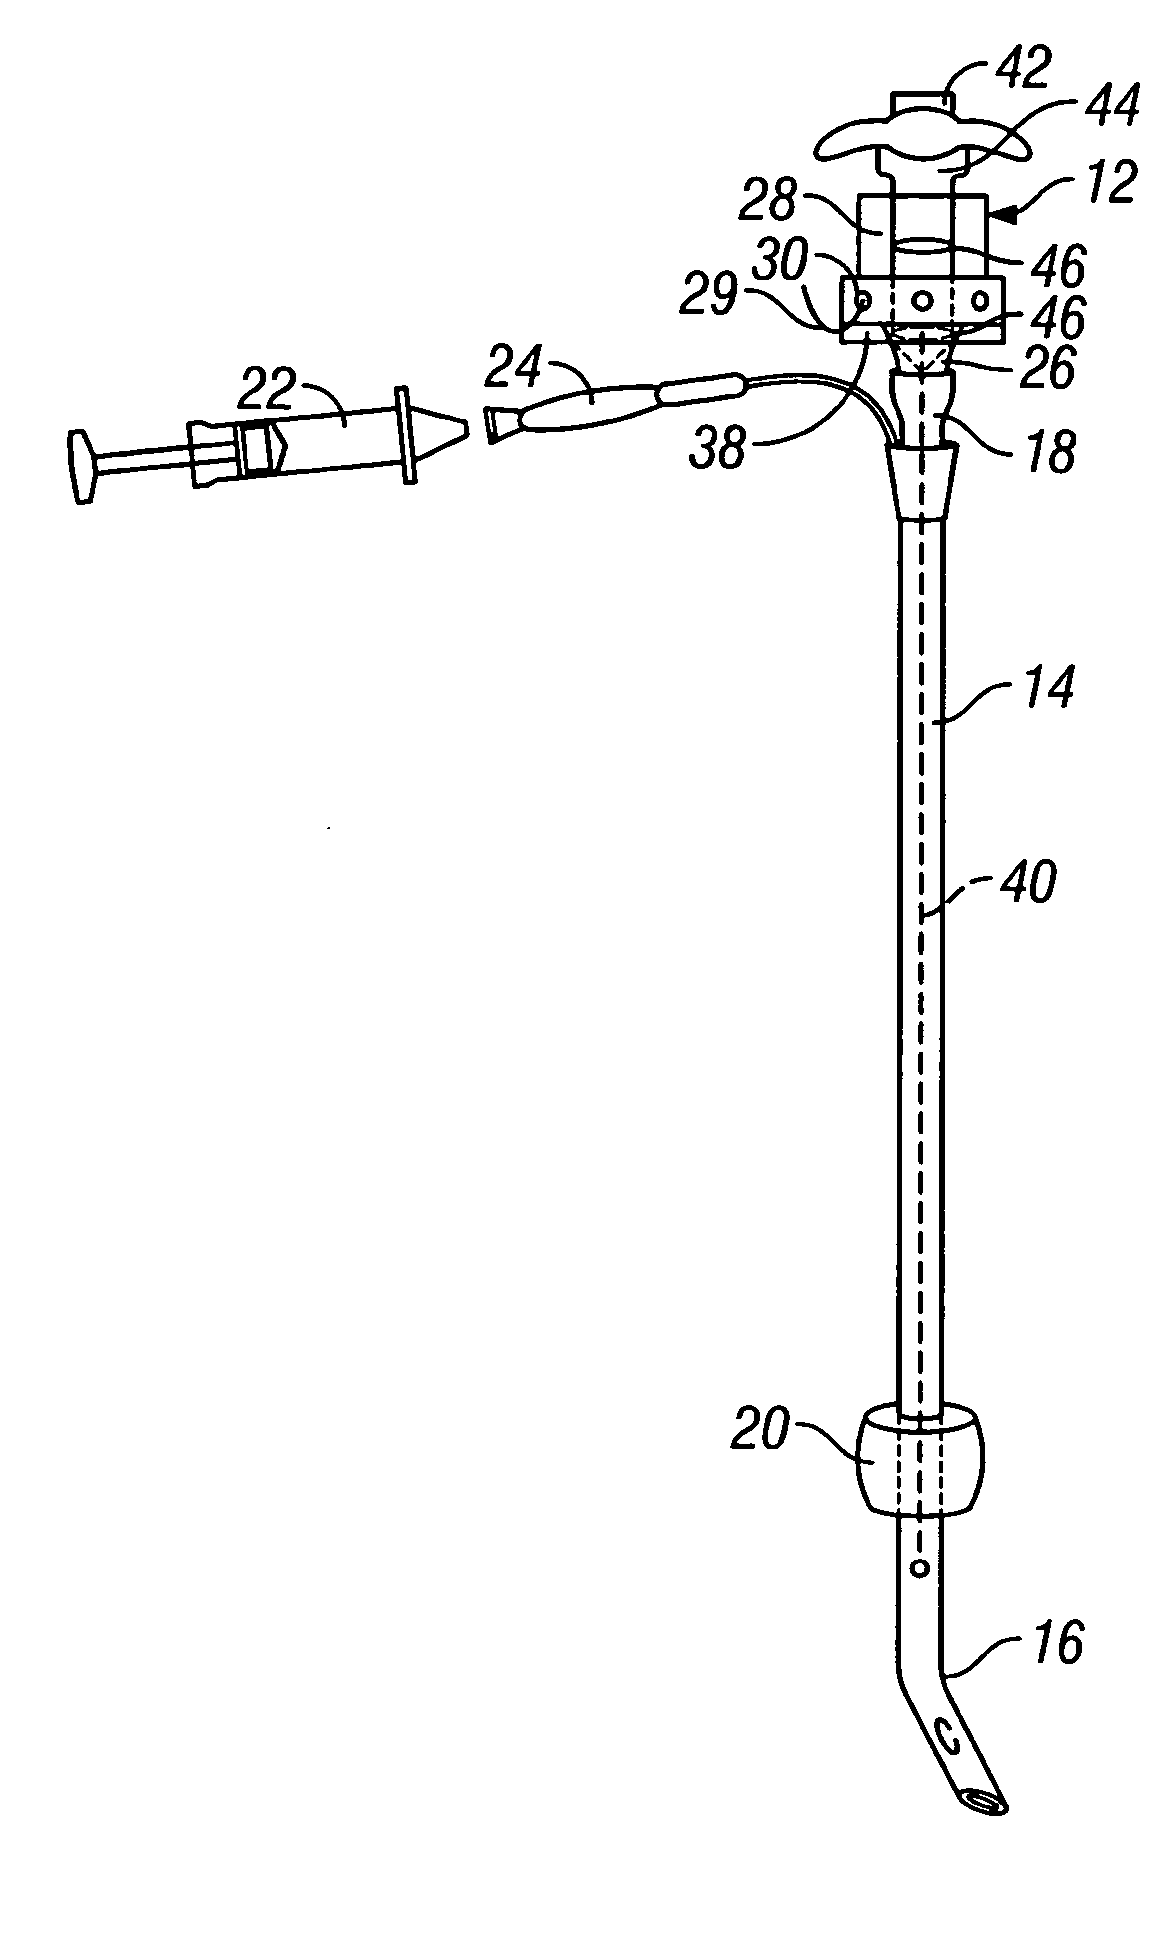 Endotracheal tube system and method of use